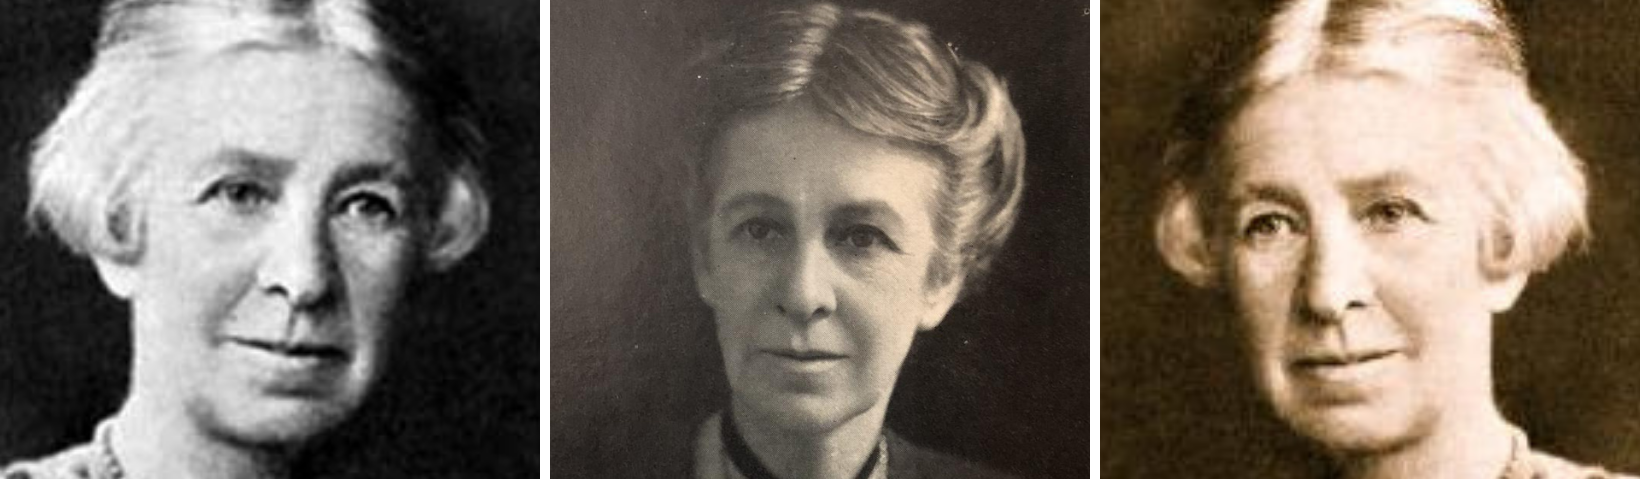 Evelyn Underhill: Foremother of Contemporary Spirituality